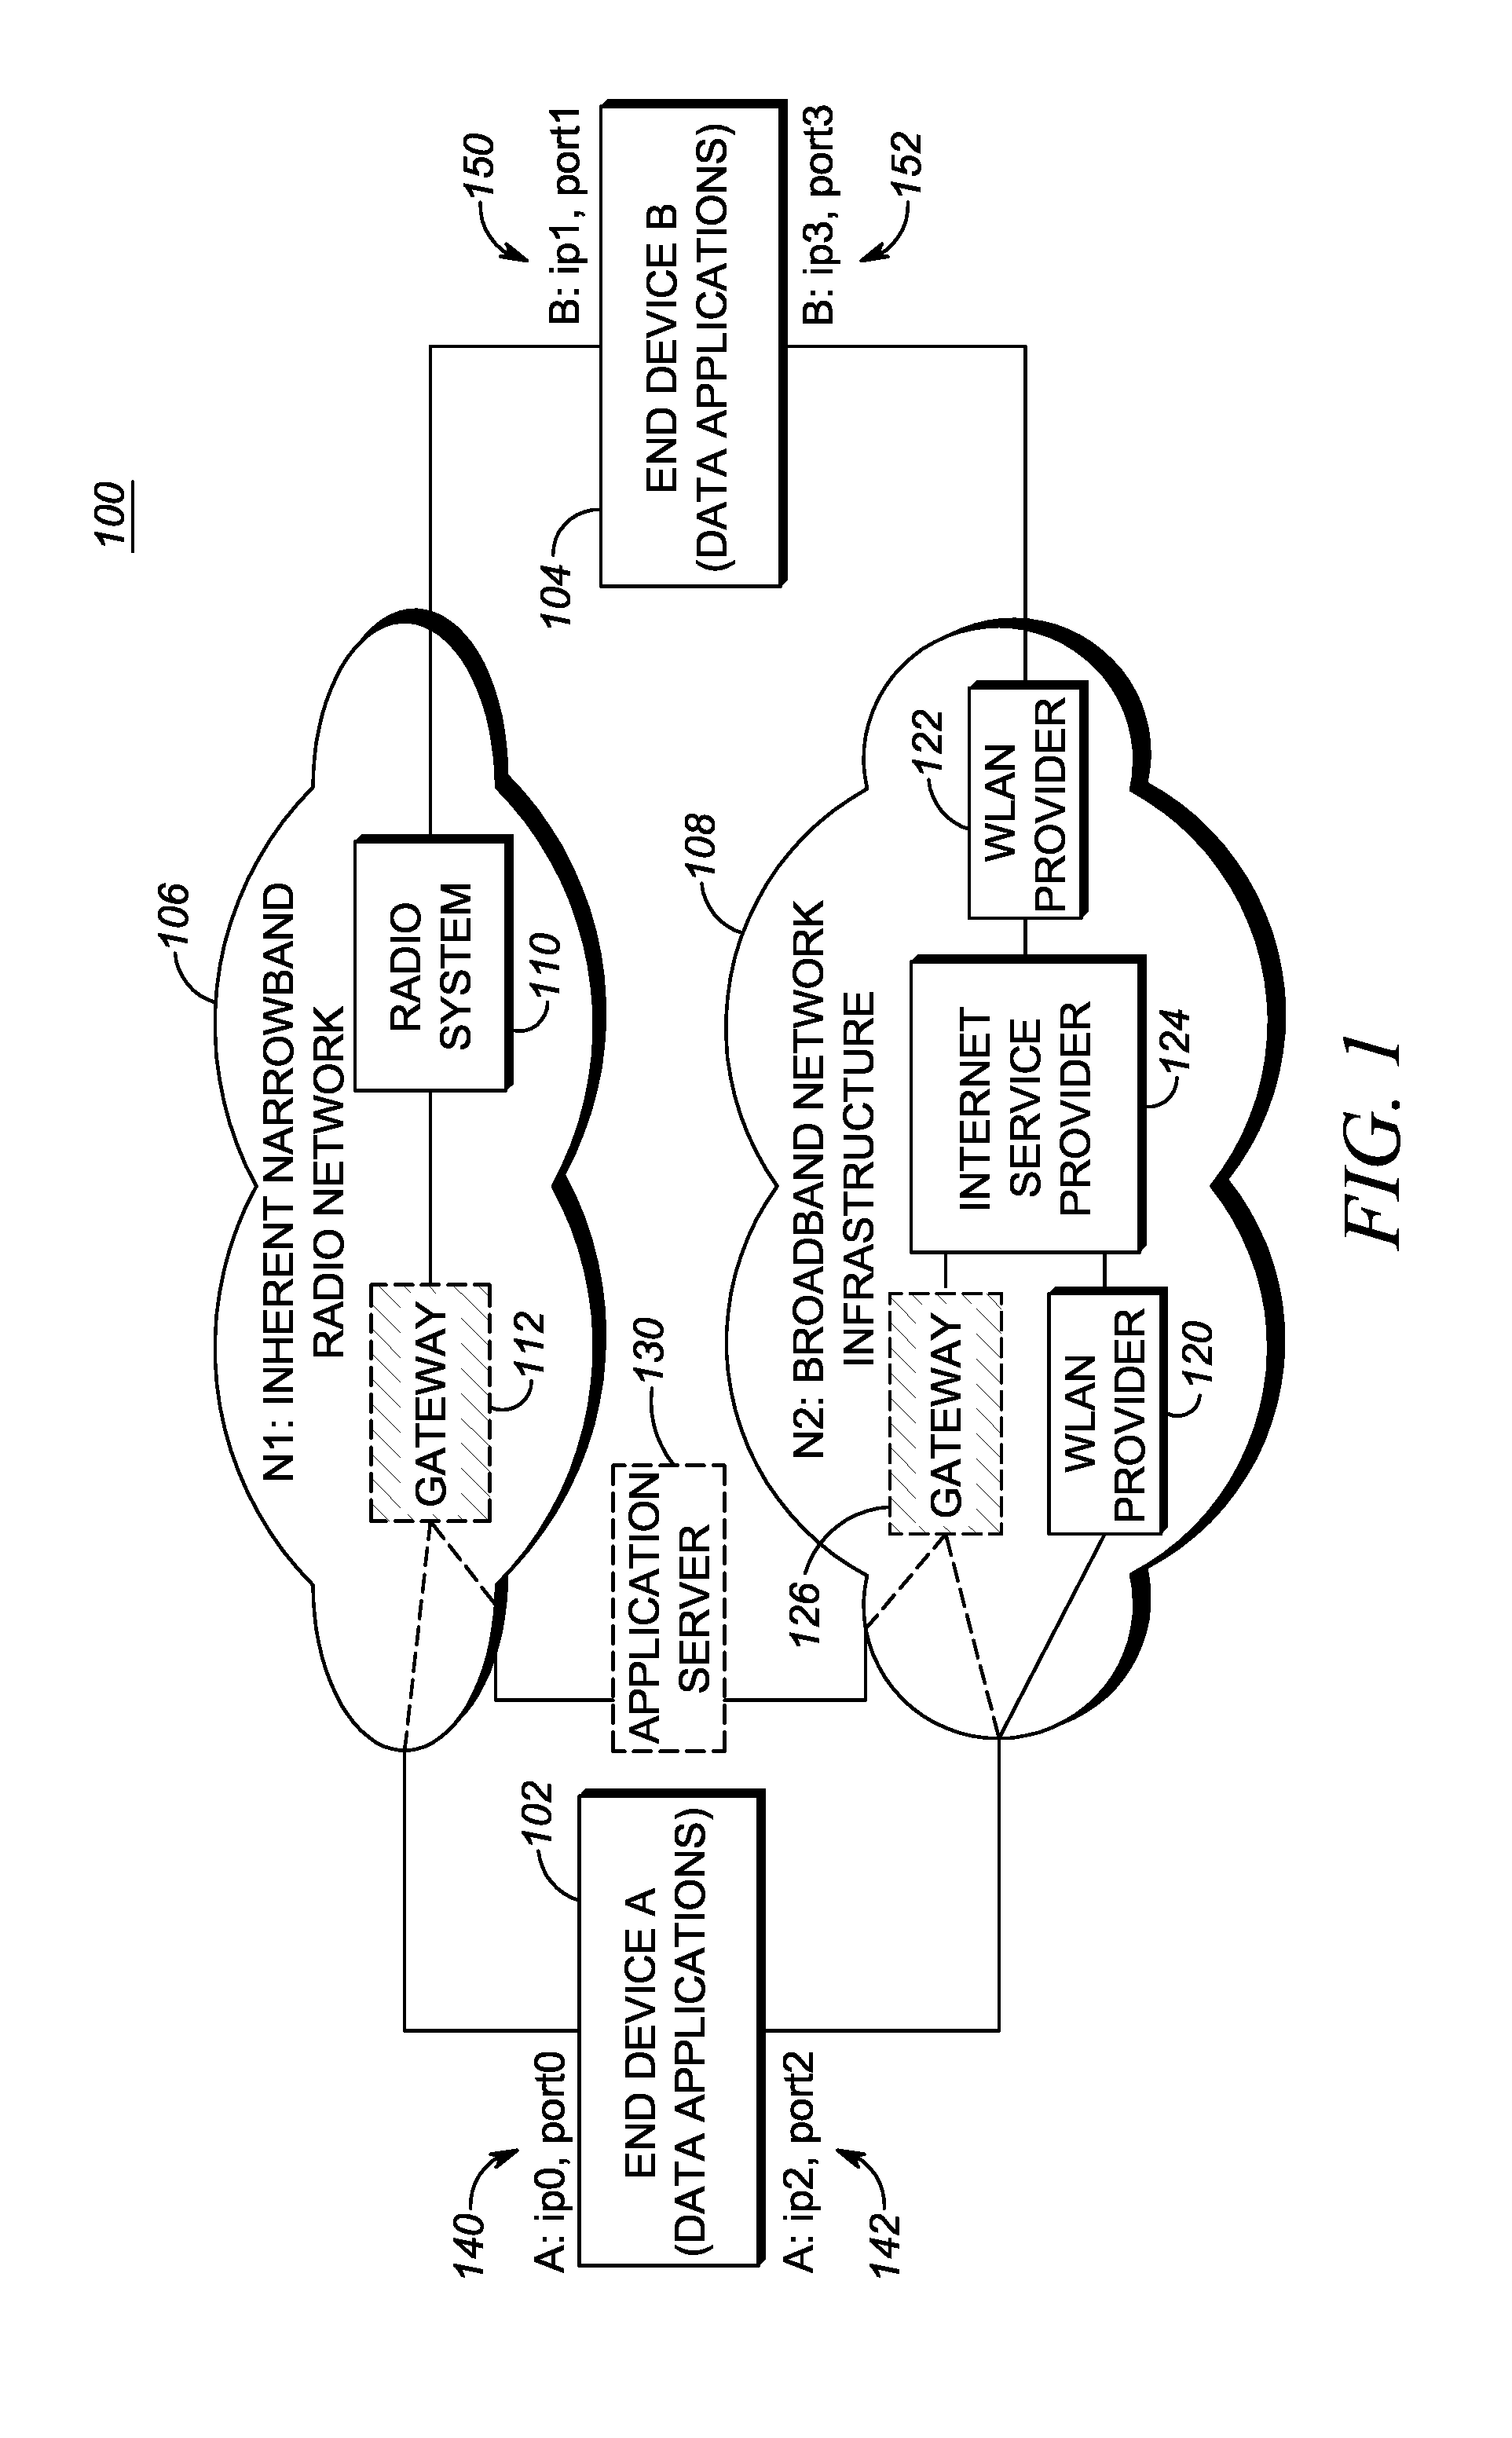 Systems and methods for application controlled network selection between narrowband and broadband wireless networks